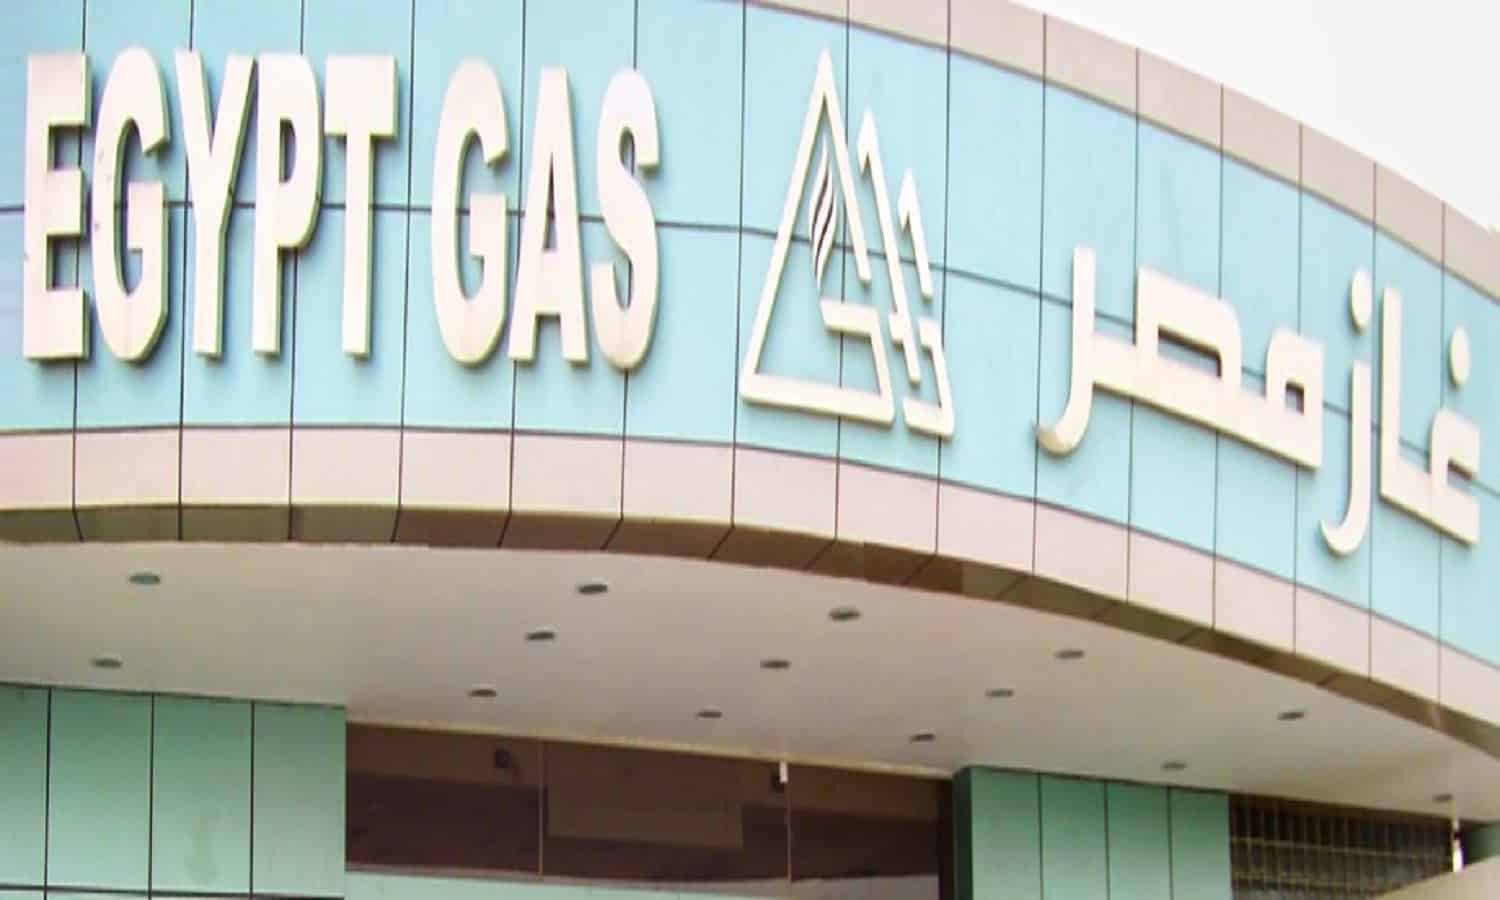 Egypt Gas to distribute 0.49-for-1 bonus shares in May